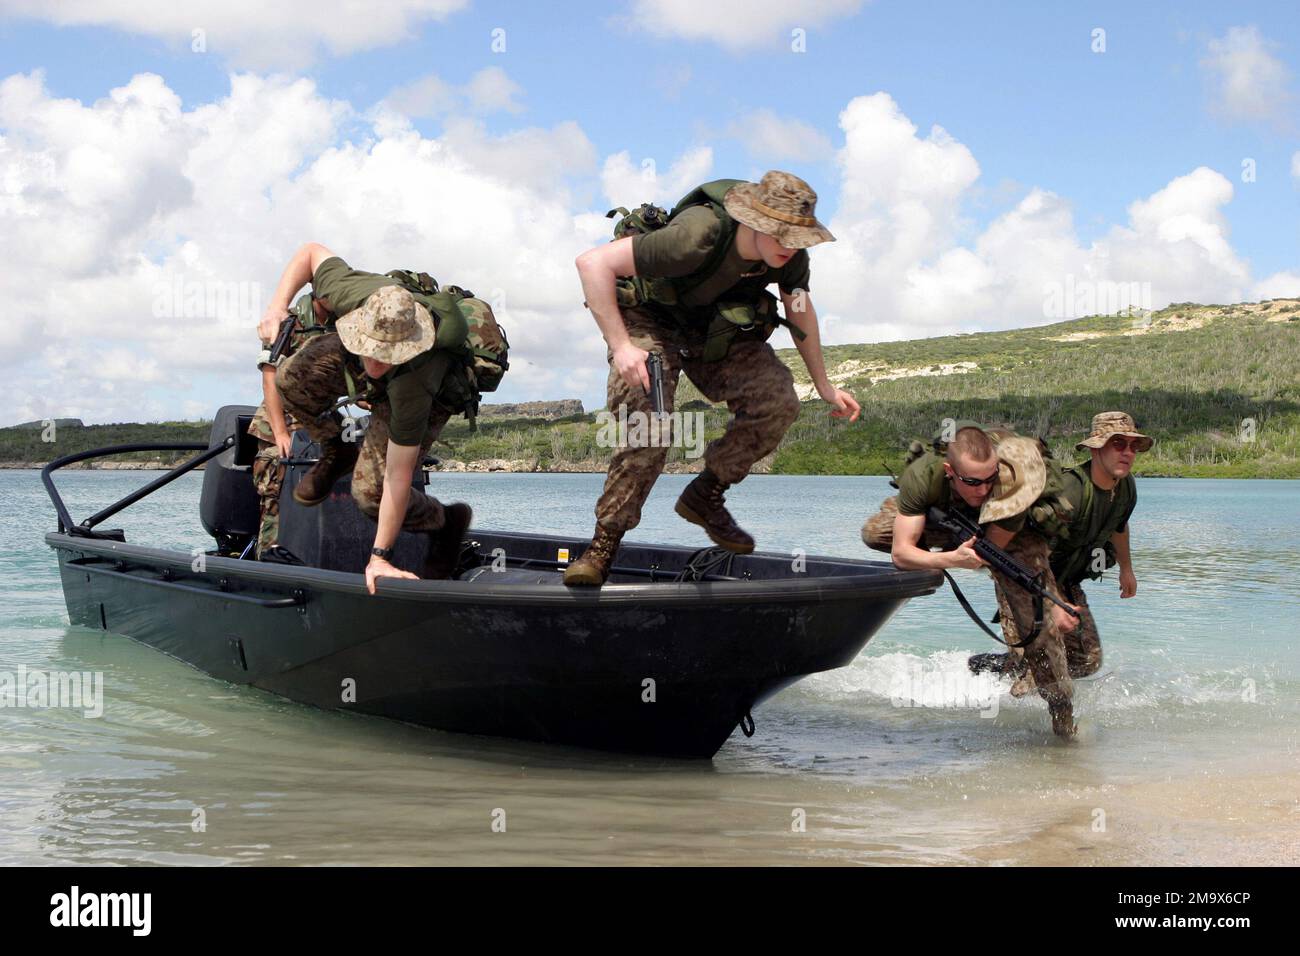 US Marine Corps (USMC) personnel with Kilo Company, 3rd Battalion, 25th Marines, jump from a Royal Dutch Marine boat during a beach assault exercise on the island of Curacao during Dutch Bilateral Training. Bilateral Training is an annual cooperative exchange between the USMC Reserves and the Royal Netherlands Marine Corps (RNMC). Country: Netherlands Antilles (ANT) Stock Photo